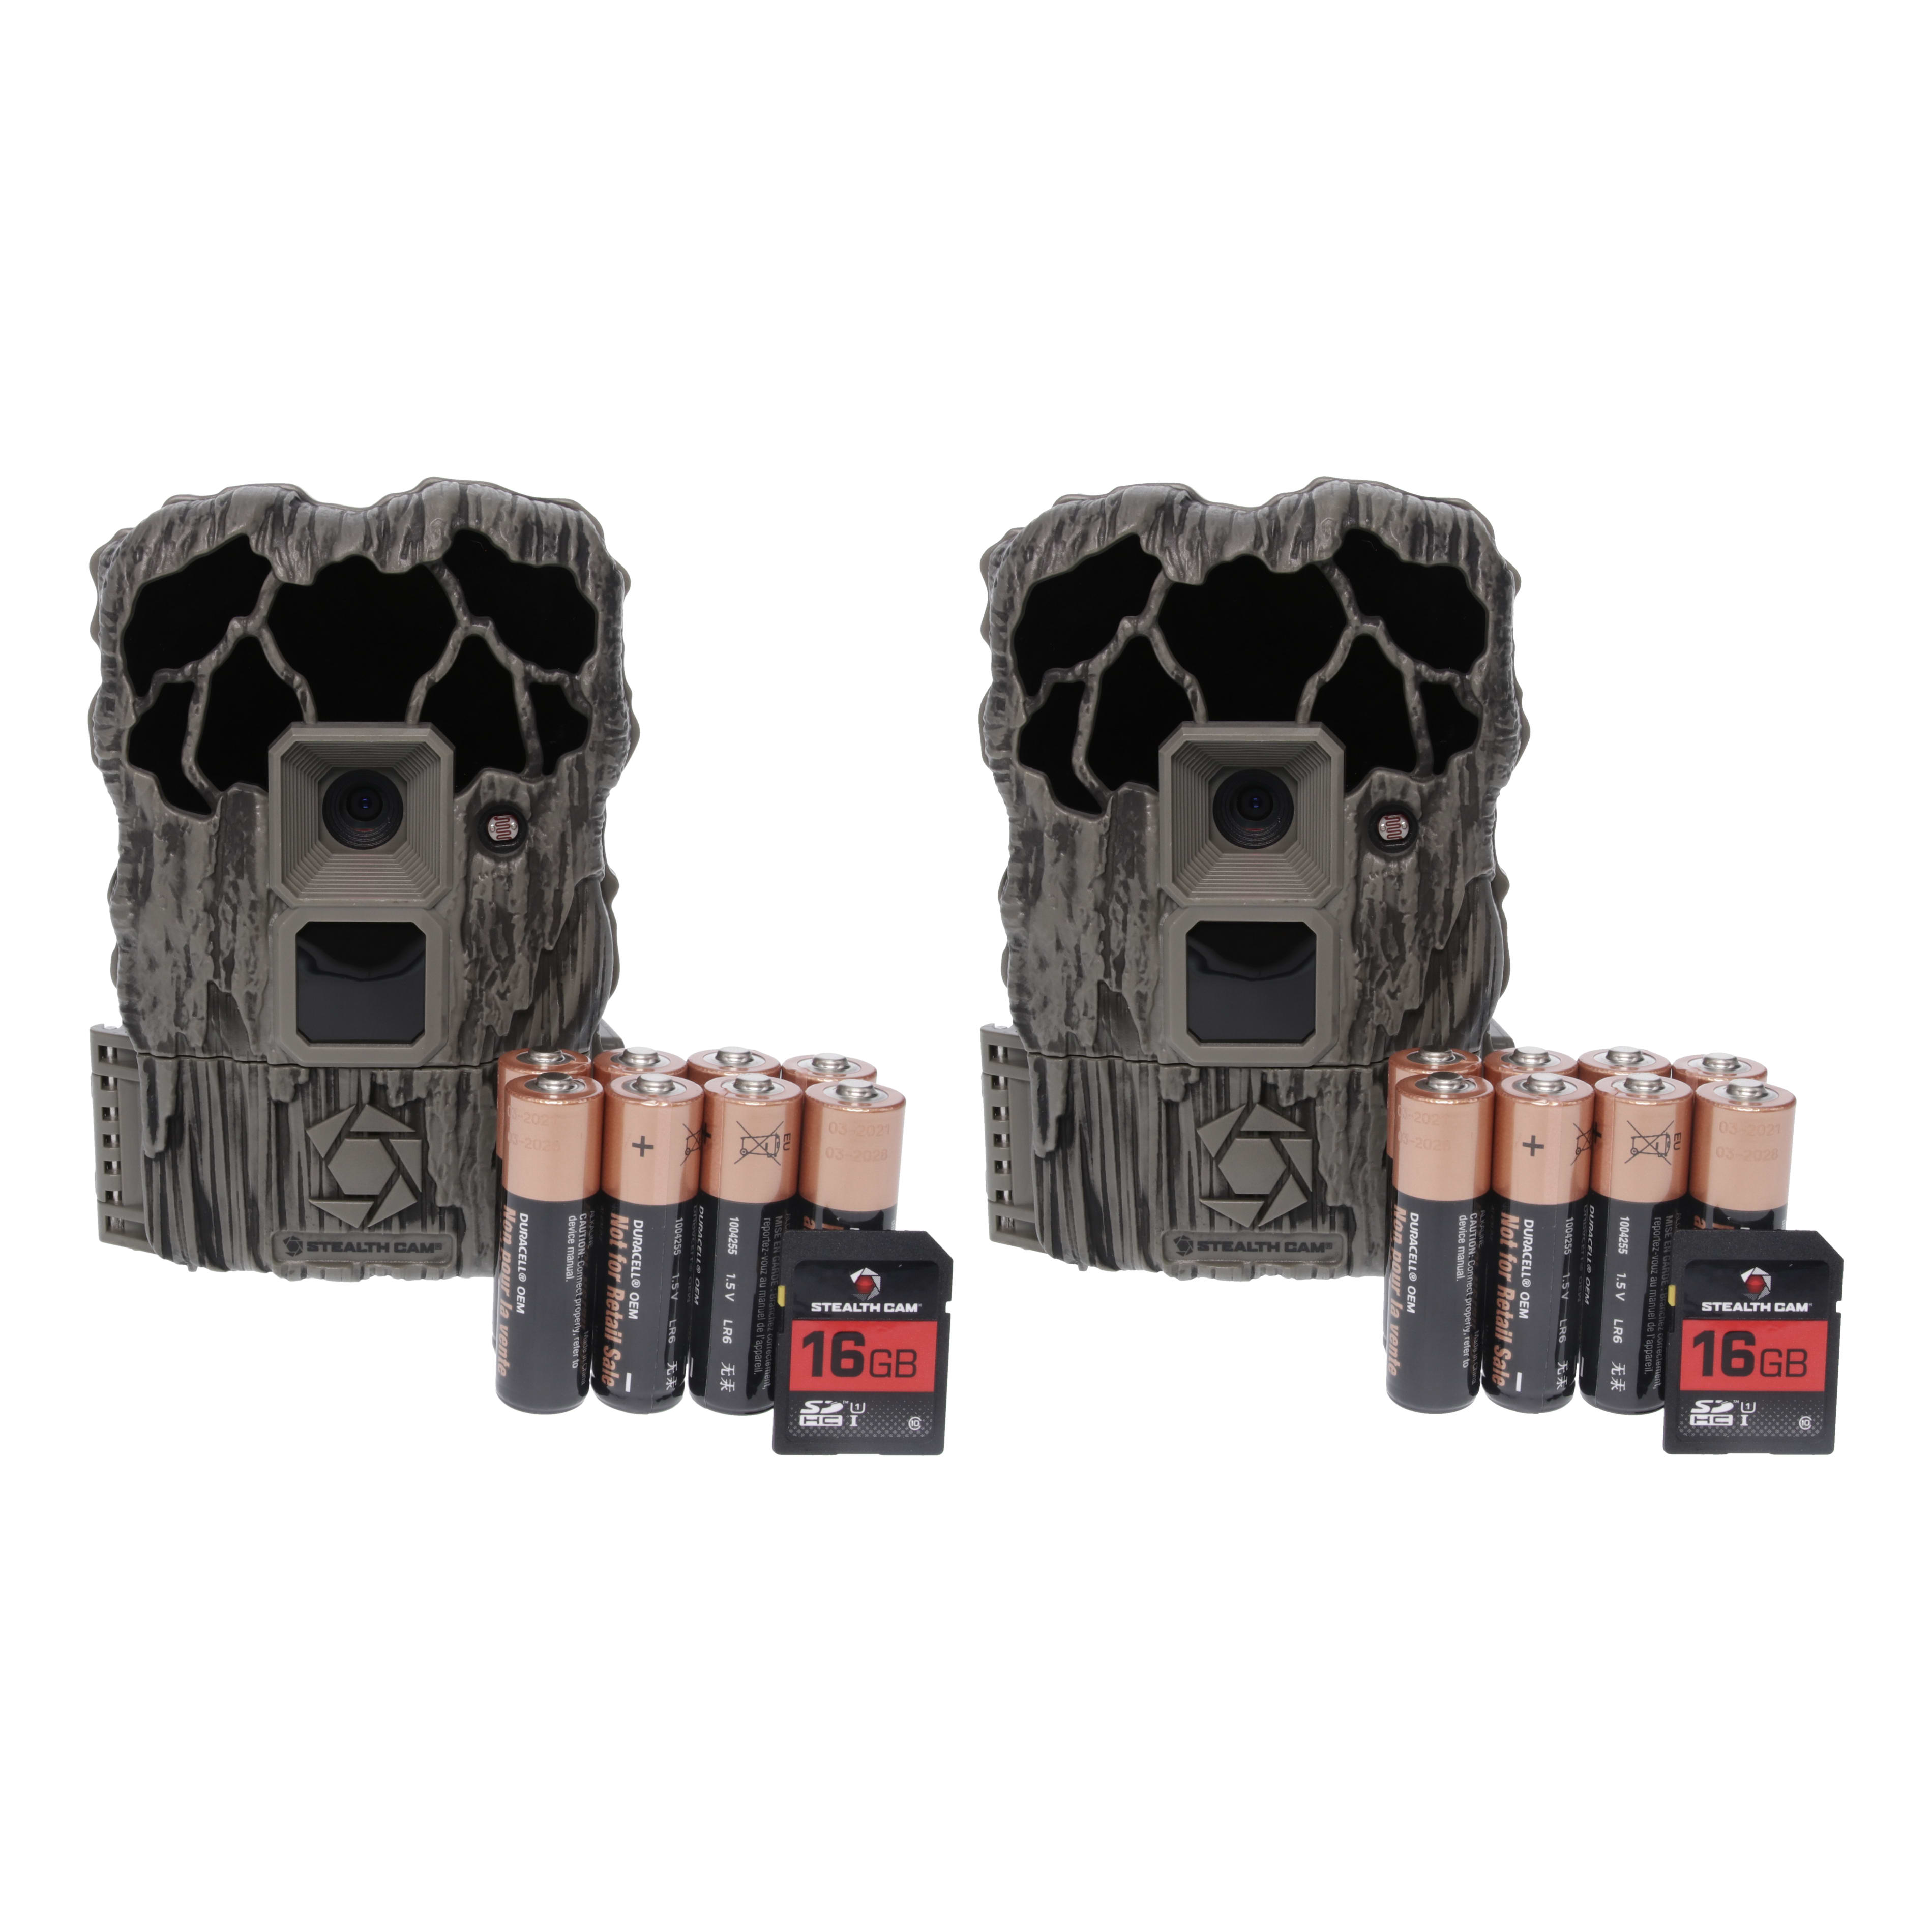 Stealth Cam® QS20NG “No Glo” Trail Camera Combo - Two Pack